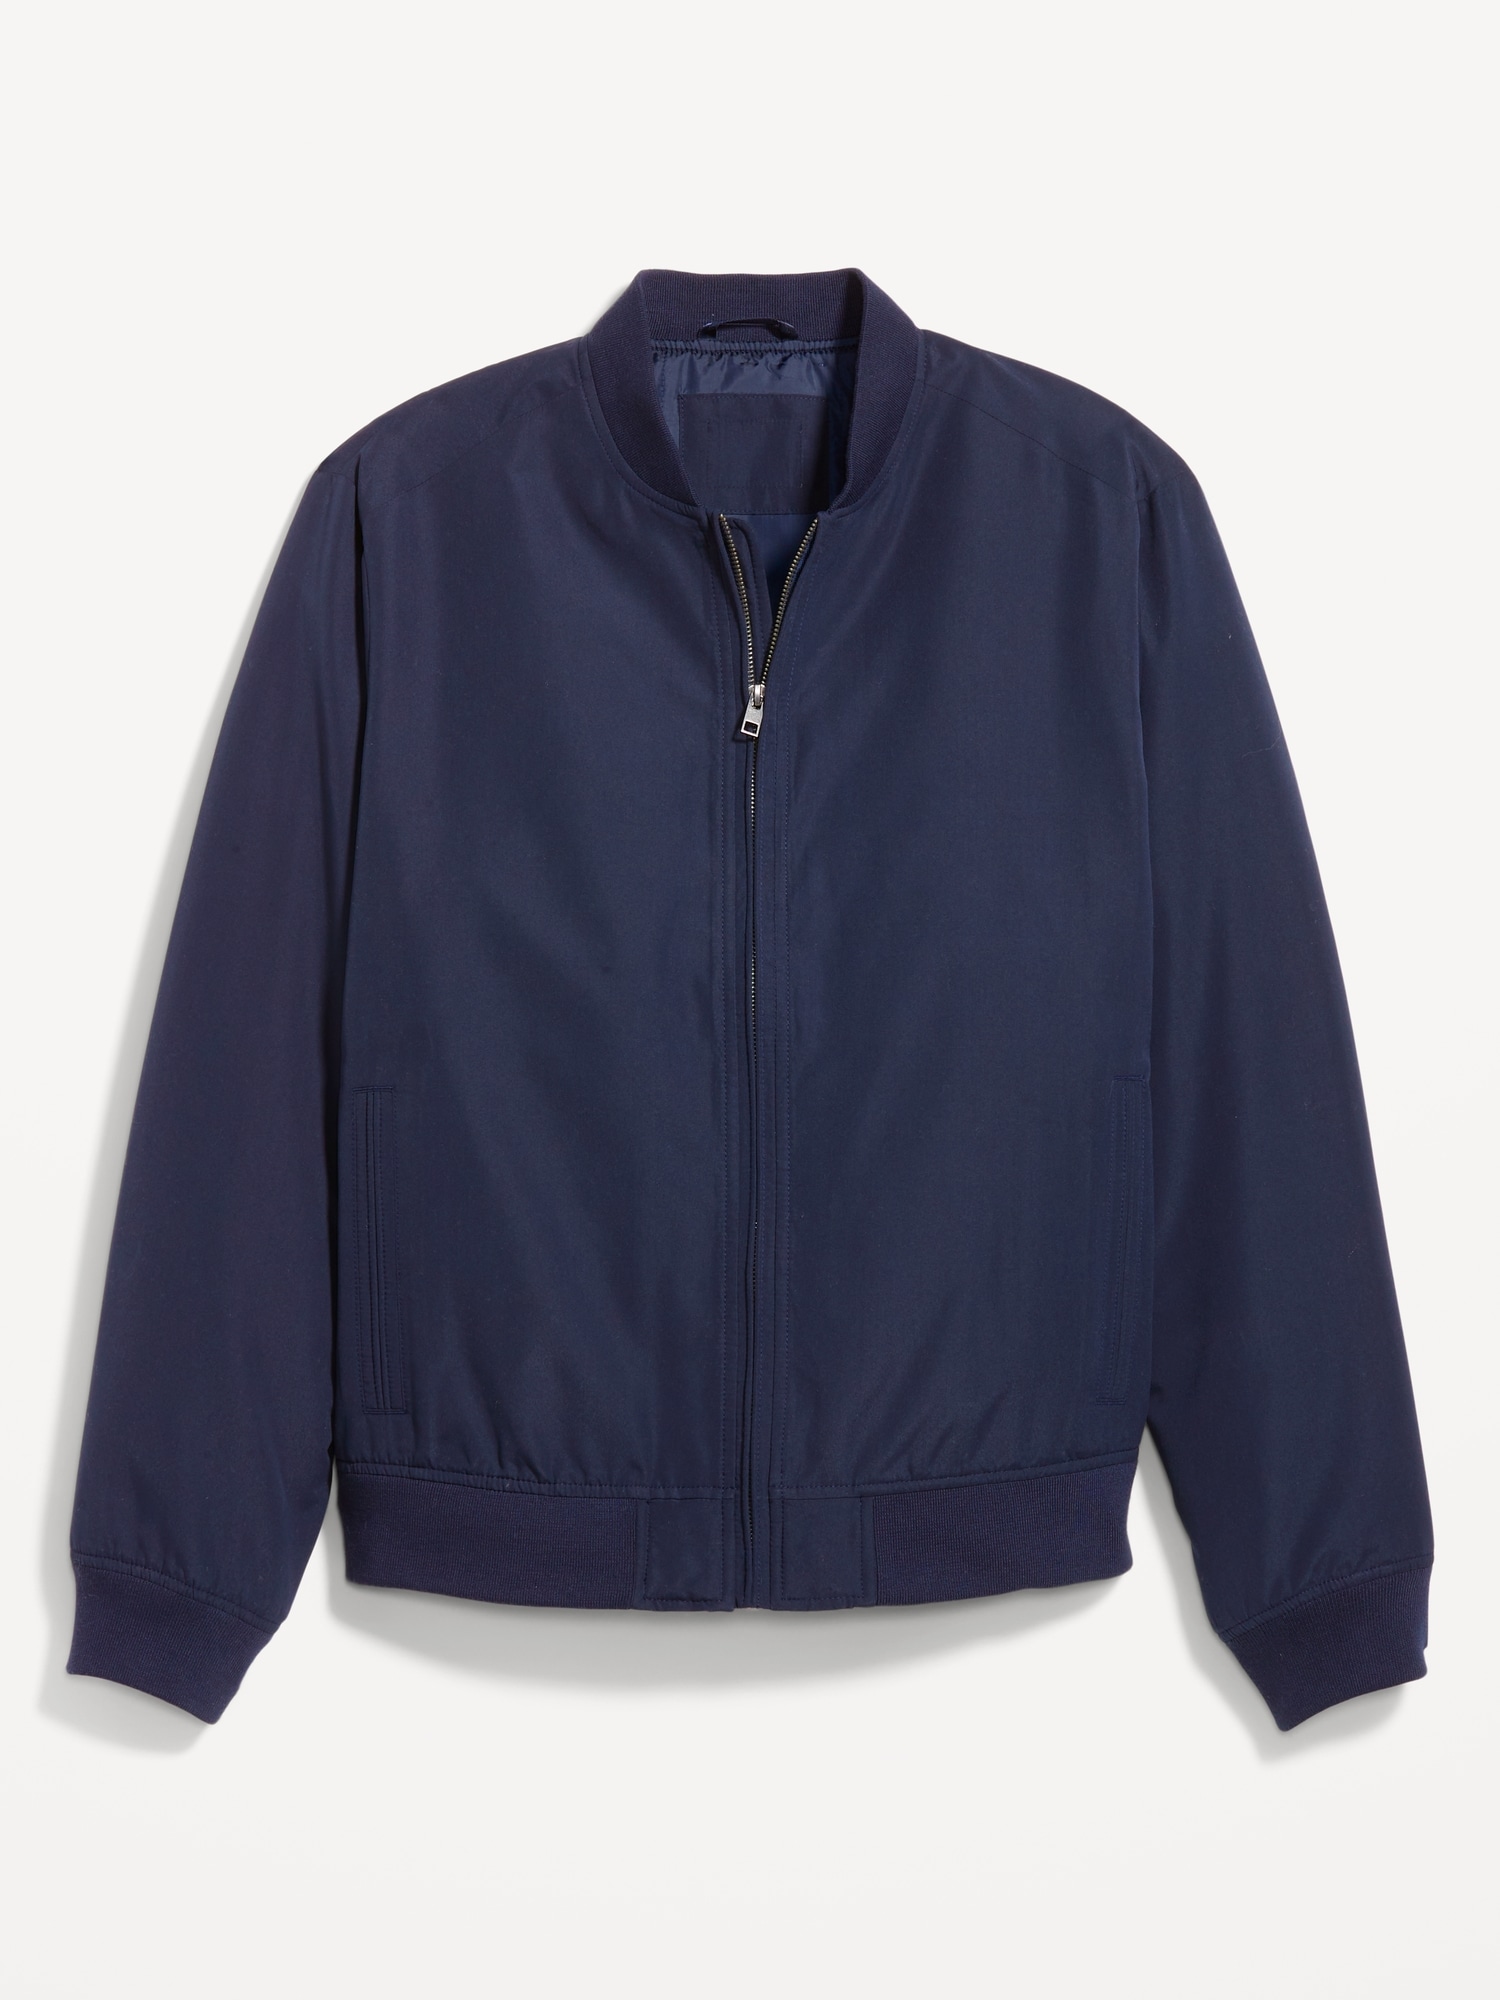 Unisex Alti-Mac Jacket - Water Resistant With Warm Fleece Inner. Avail  Black, Navy, Red or Blue